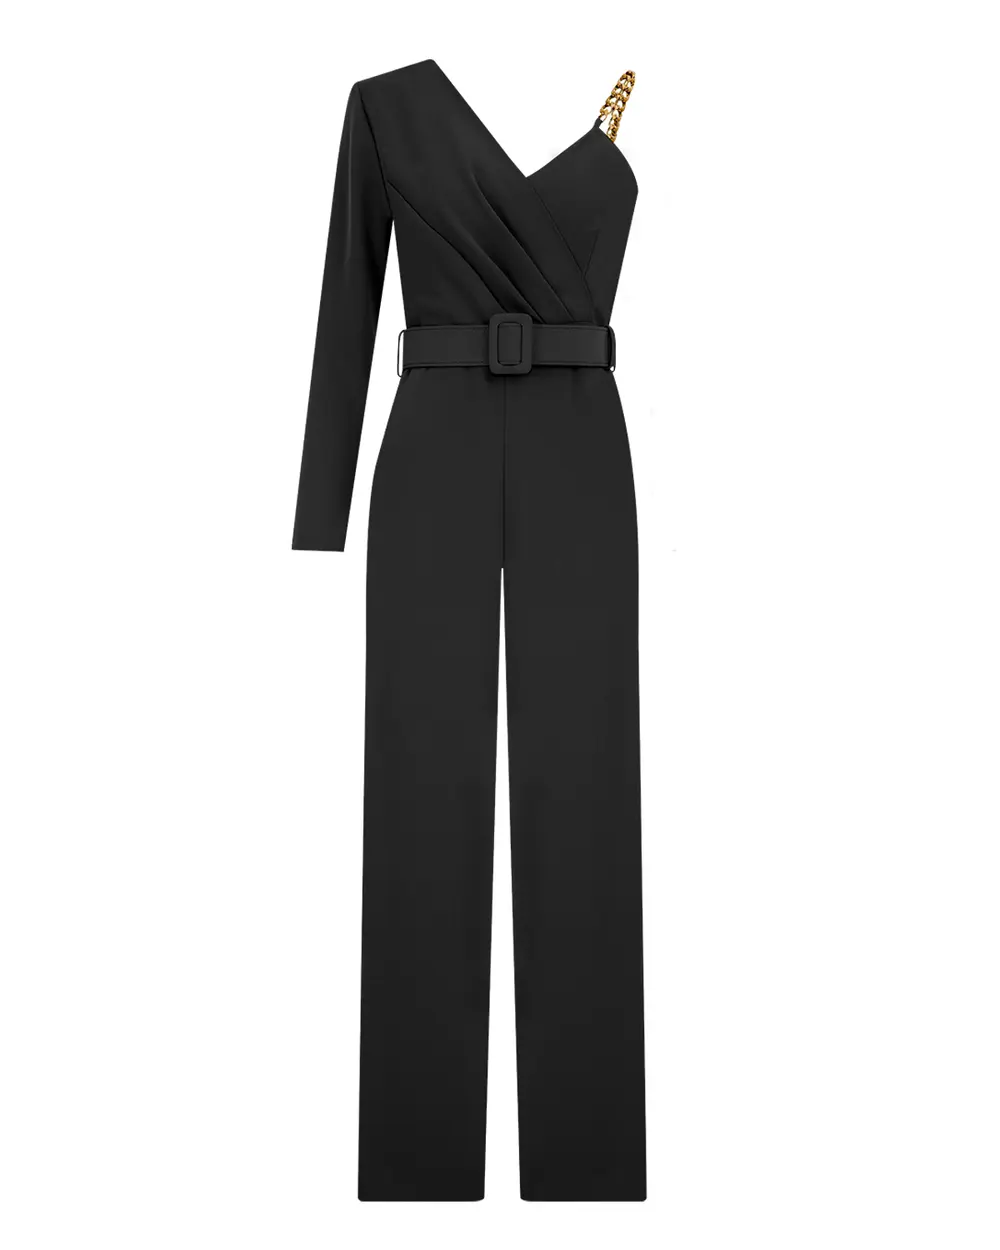 Belted Chain Detailed Stylish Jumpsuit